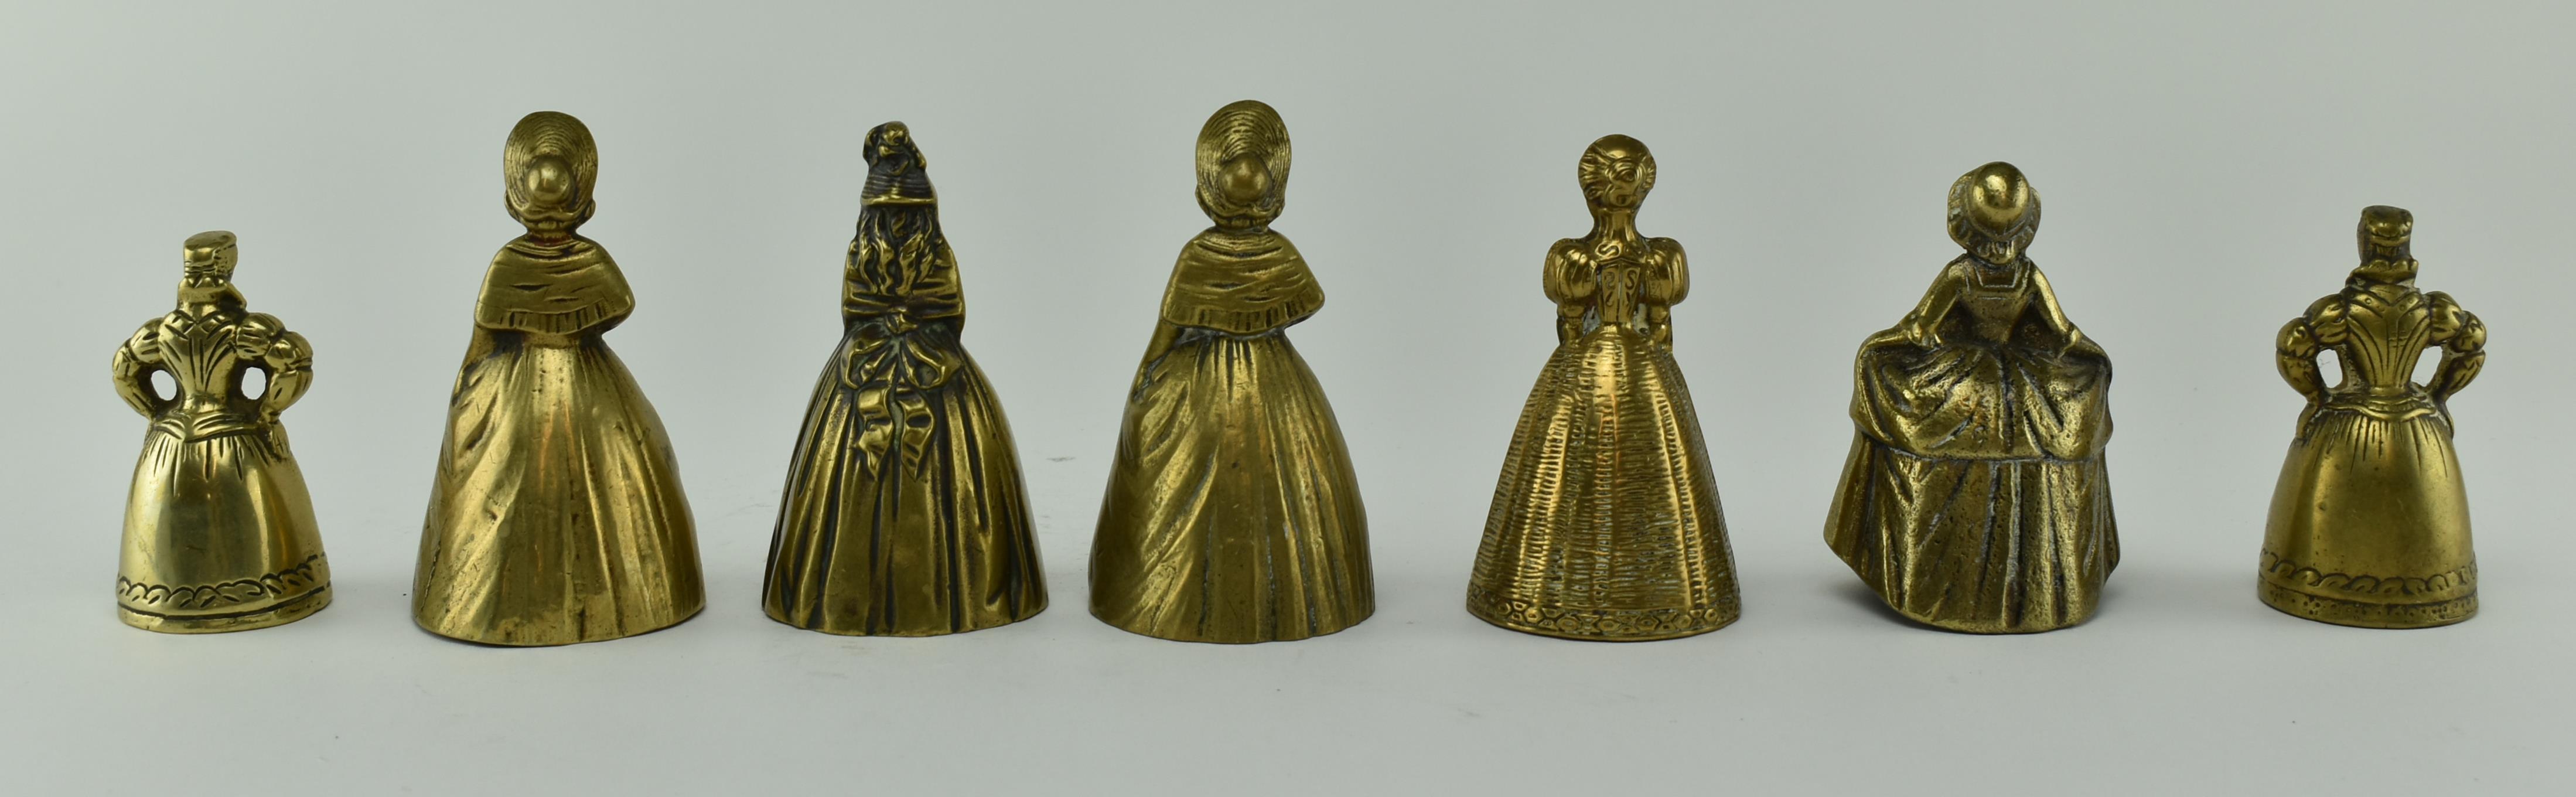 GROUP OF 18TH CENTURY BRASS LADY TABLE BELLS - Image 3 of 5